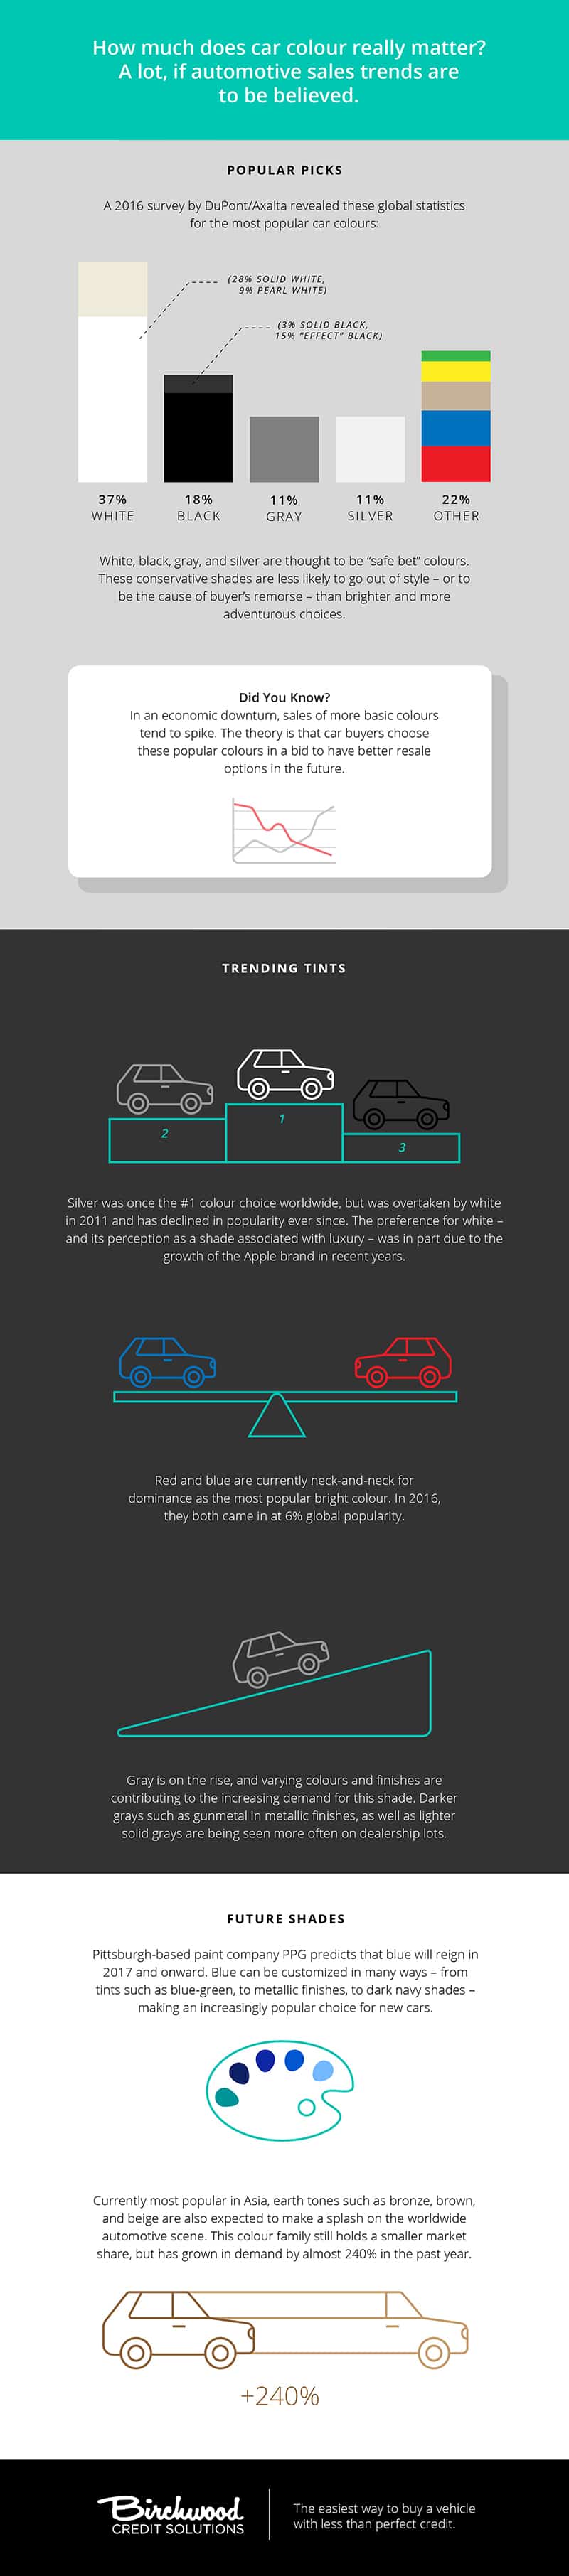 Most Popular Car Colours Infographic by Birchwood Credit Solutions